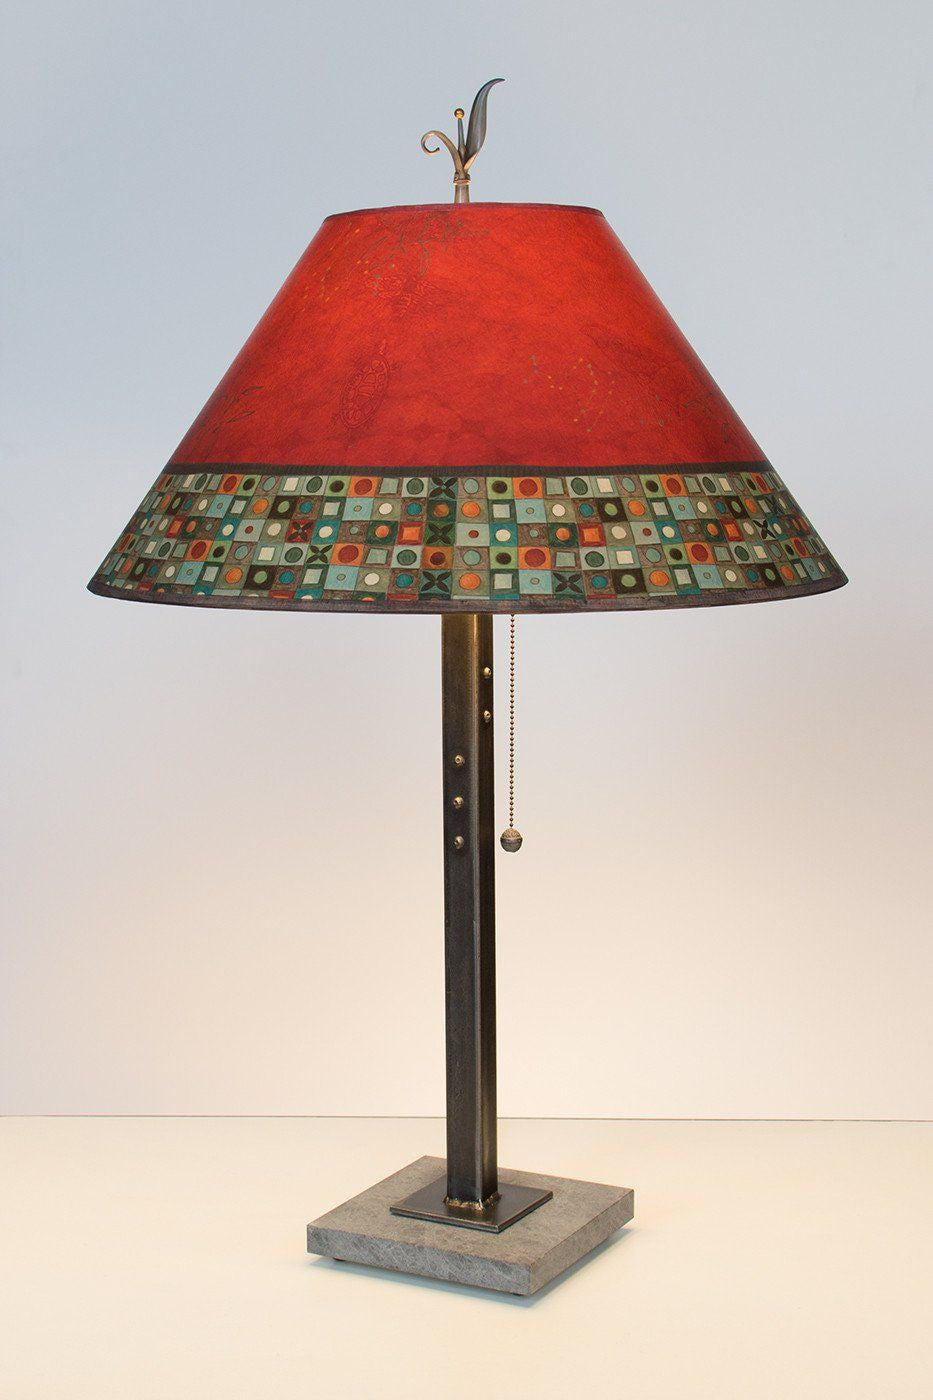 Janna Ugone &amp; Co Table Lamps Steel Table Lamp with Large Conical Shade in Red Mosaic